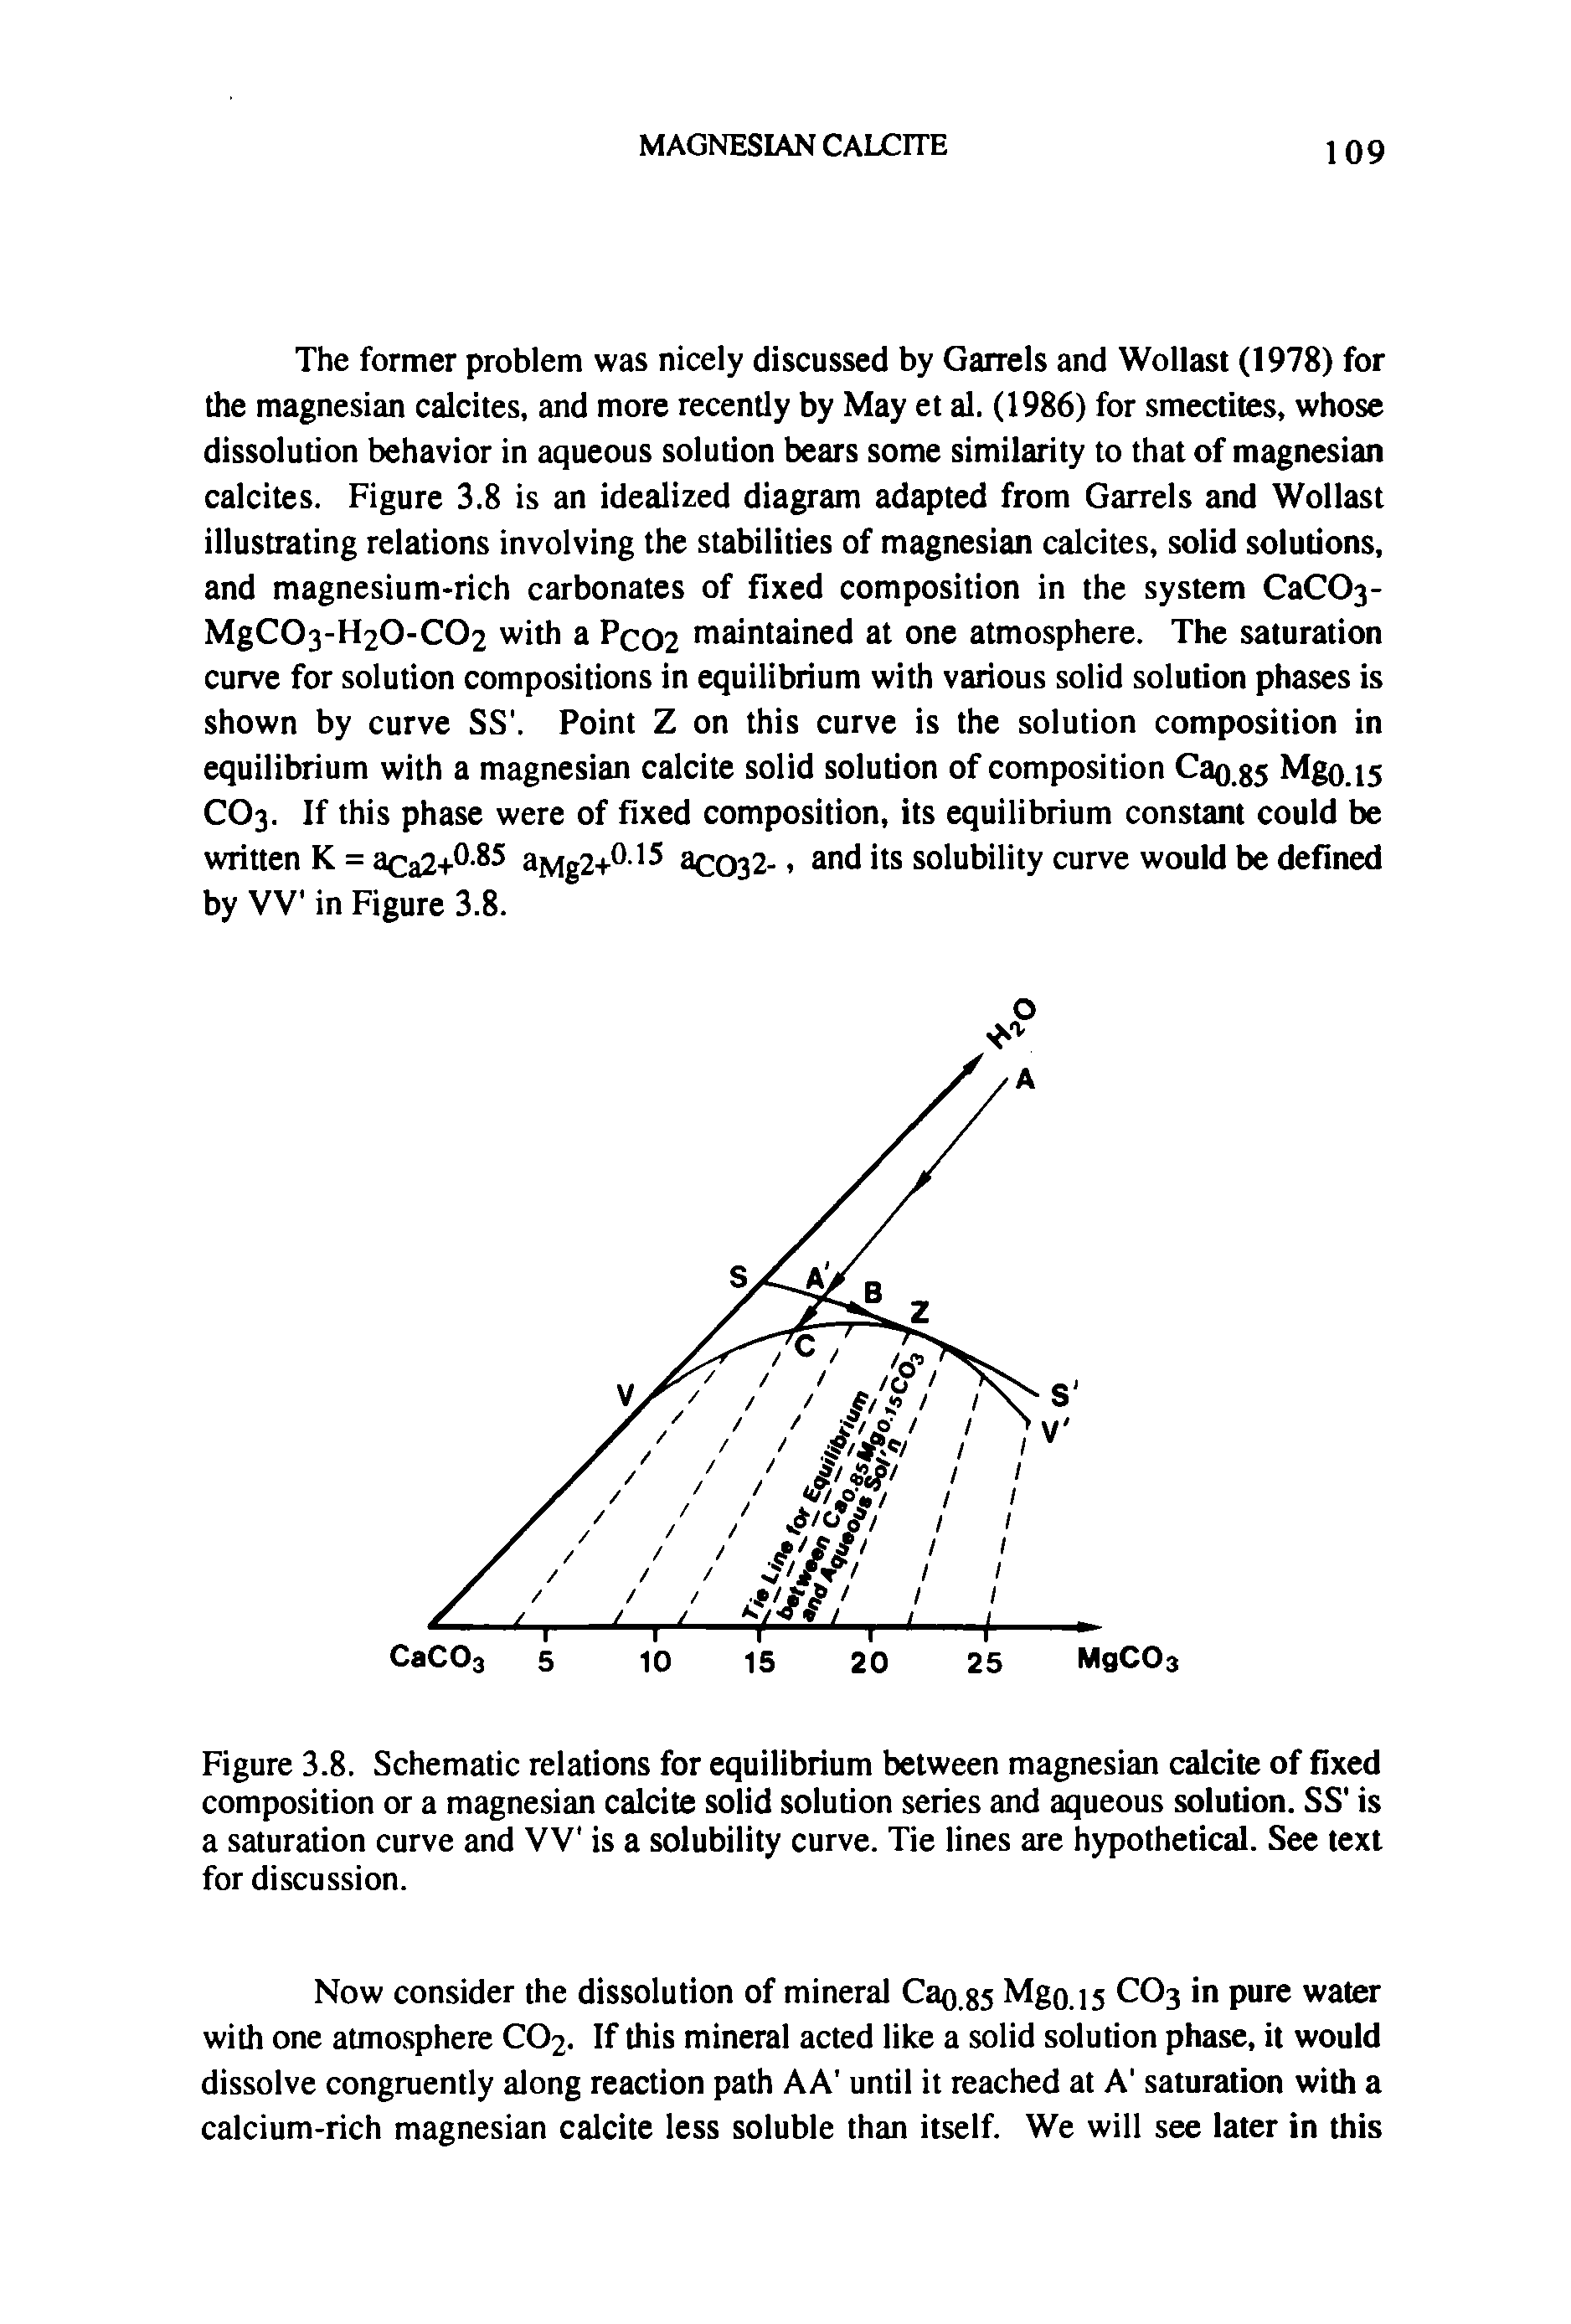 Figure 3.8. Schematic relations for equilibrium between magnesian calcite of fixed composition or a magnesian calcite solid solution series and aqueous solution. SS is a saturation curve and VV is a solubility curve. Tie lines are hypothetical. See text for discussion.